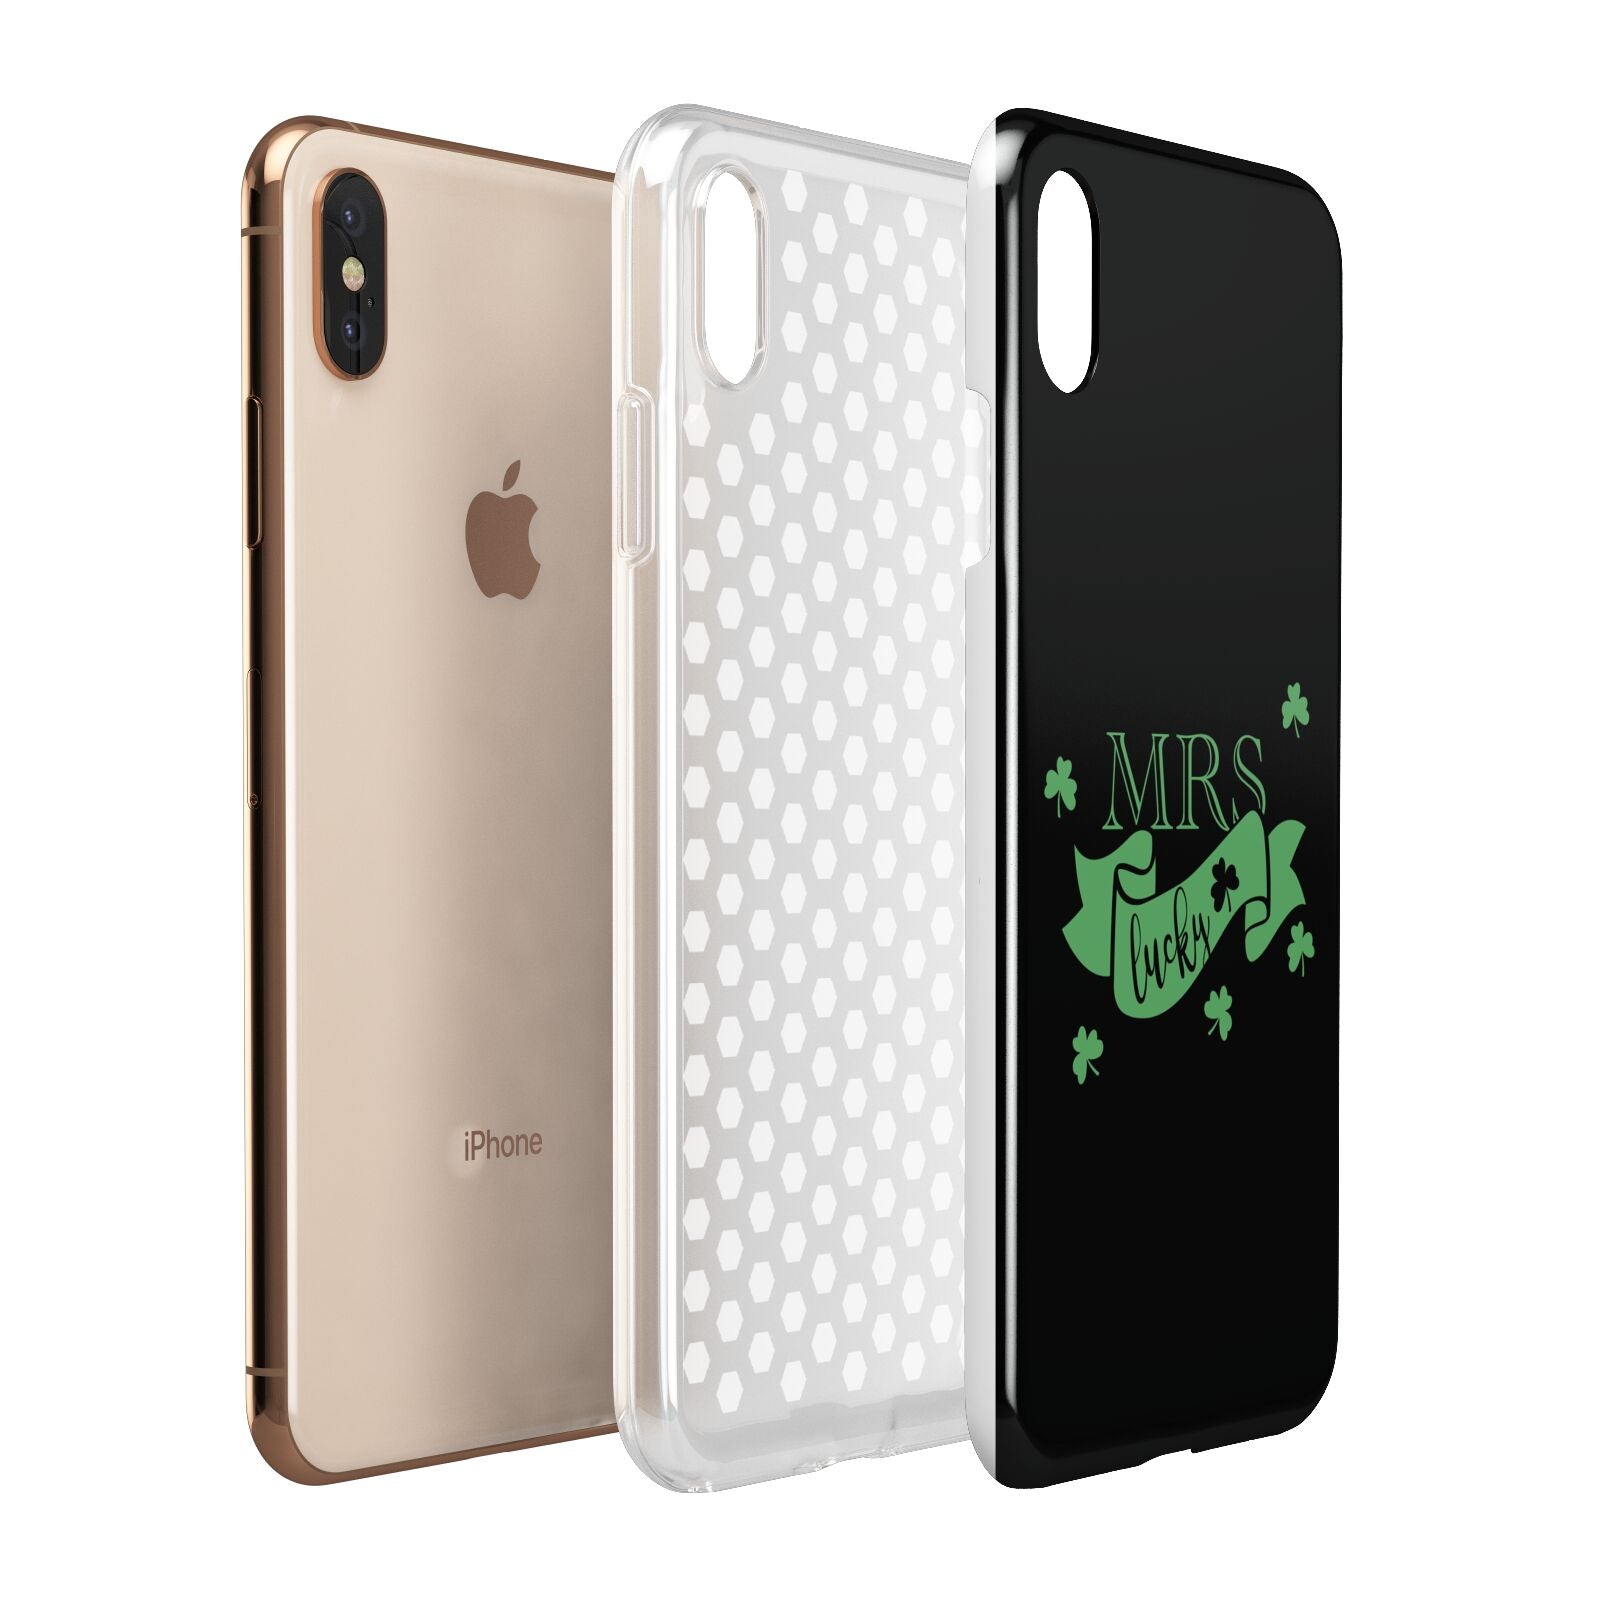 Mrs Lucky Apple iPhone Xs Max 3D Tough Case Expanded View